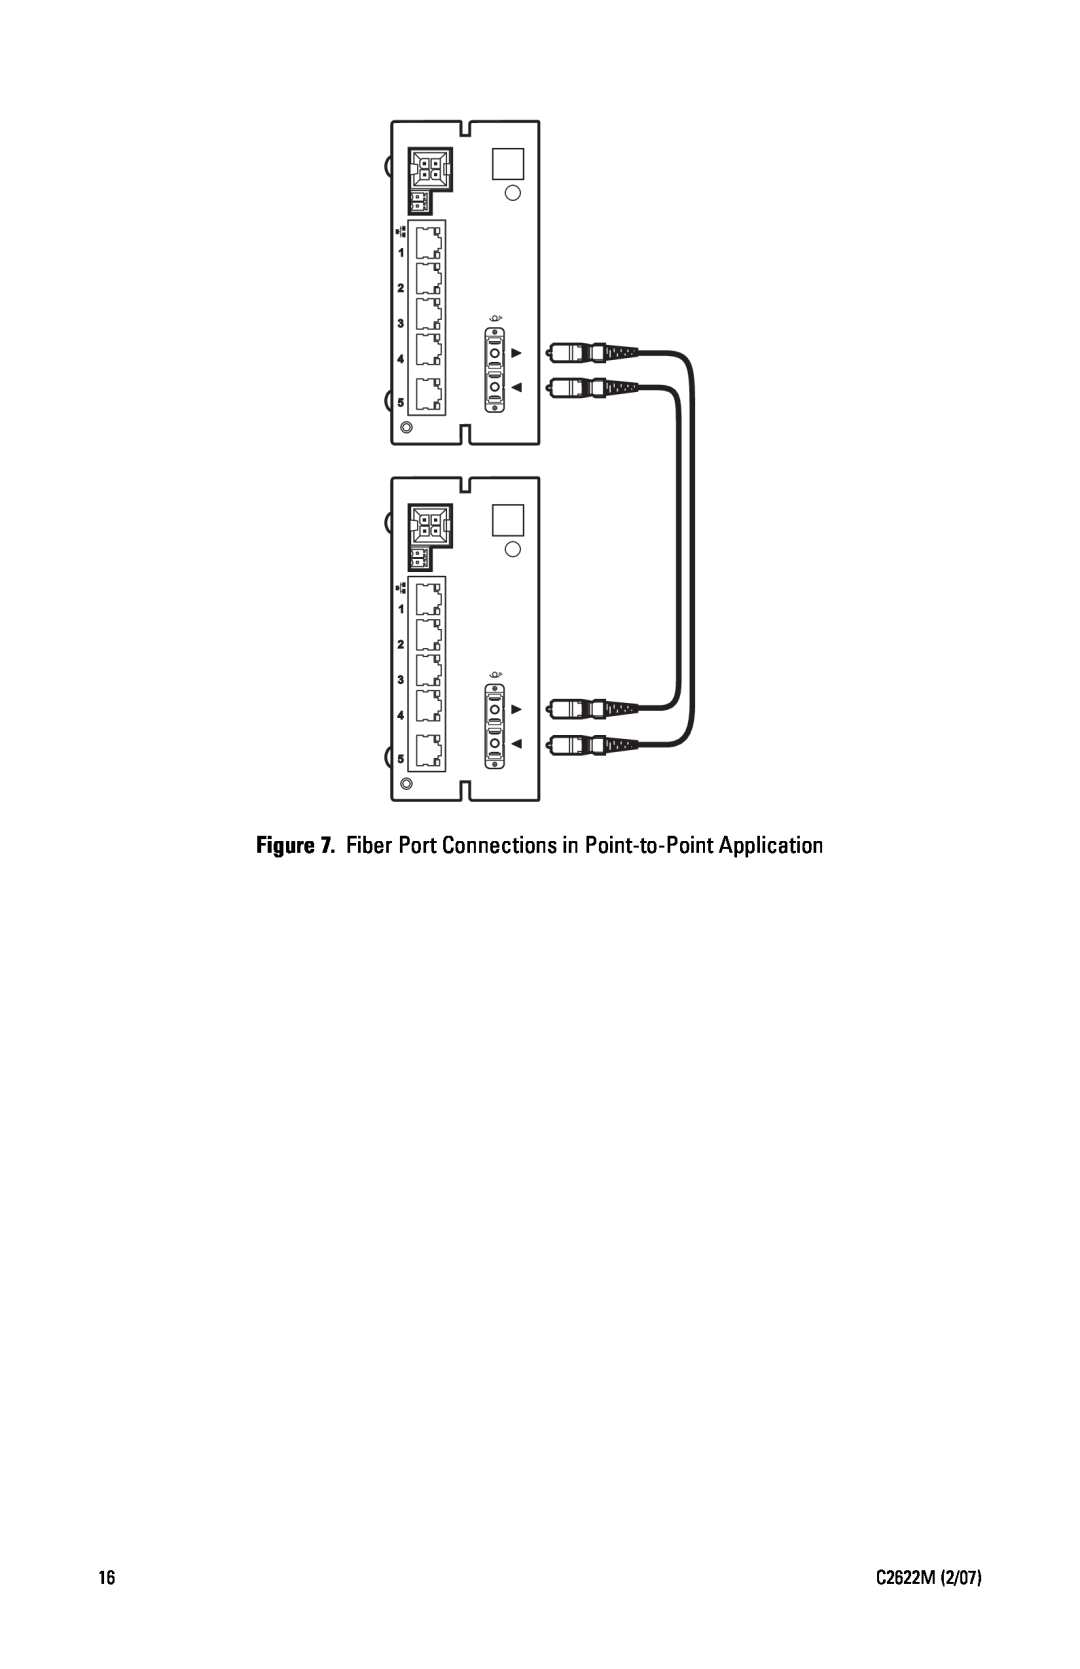 Pelco manual Fiber Port Connections in Point-to-Point Application, C2622M 2/07 